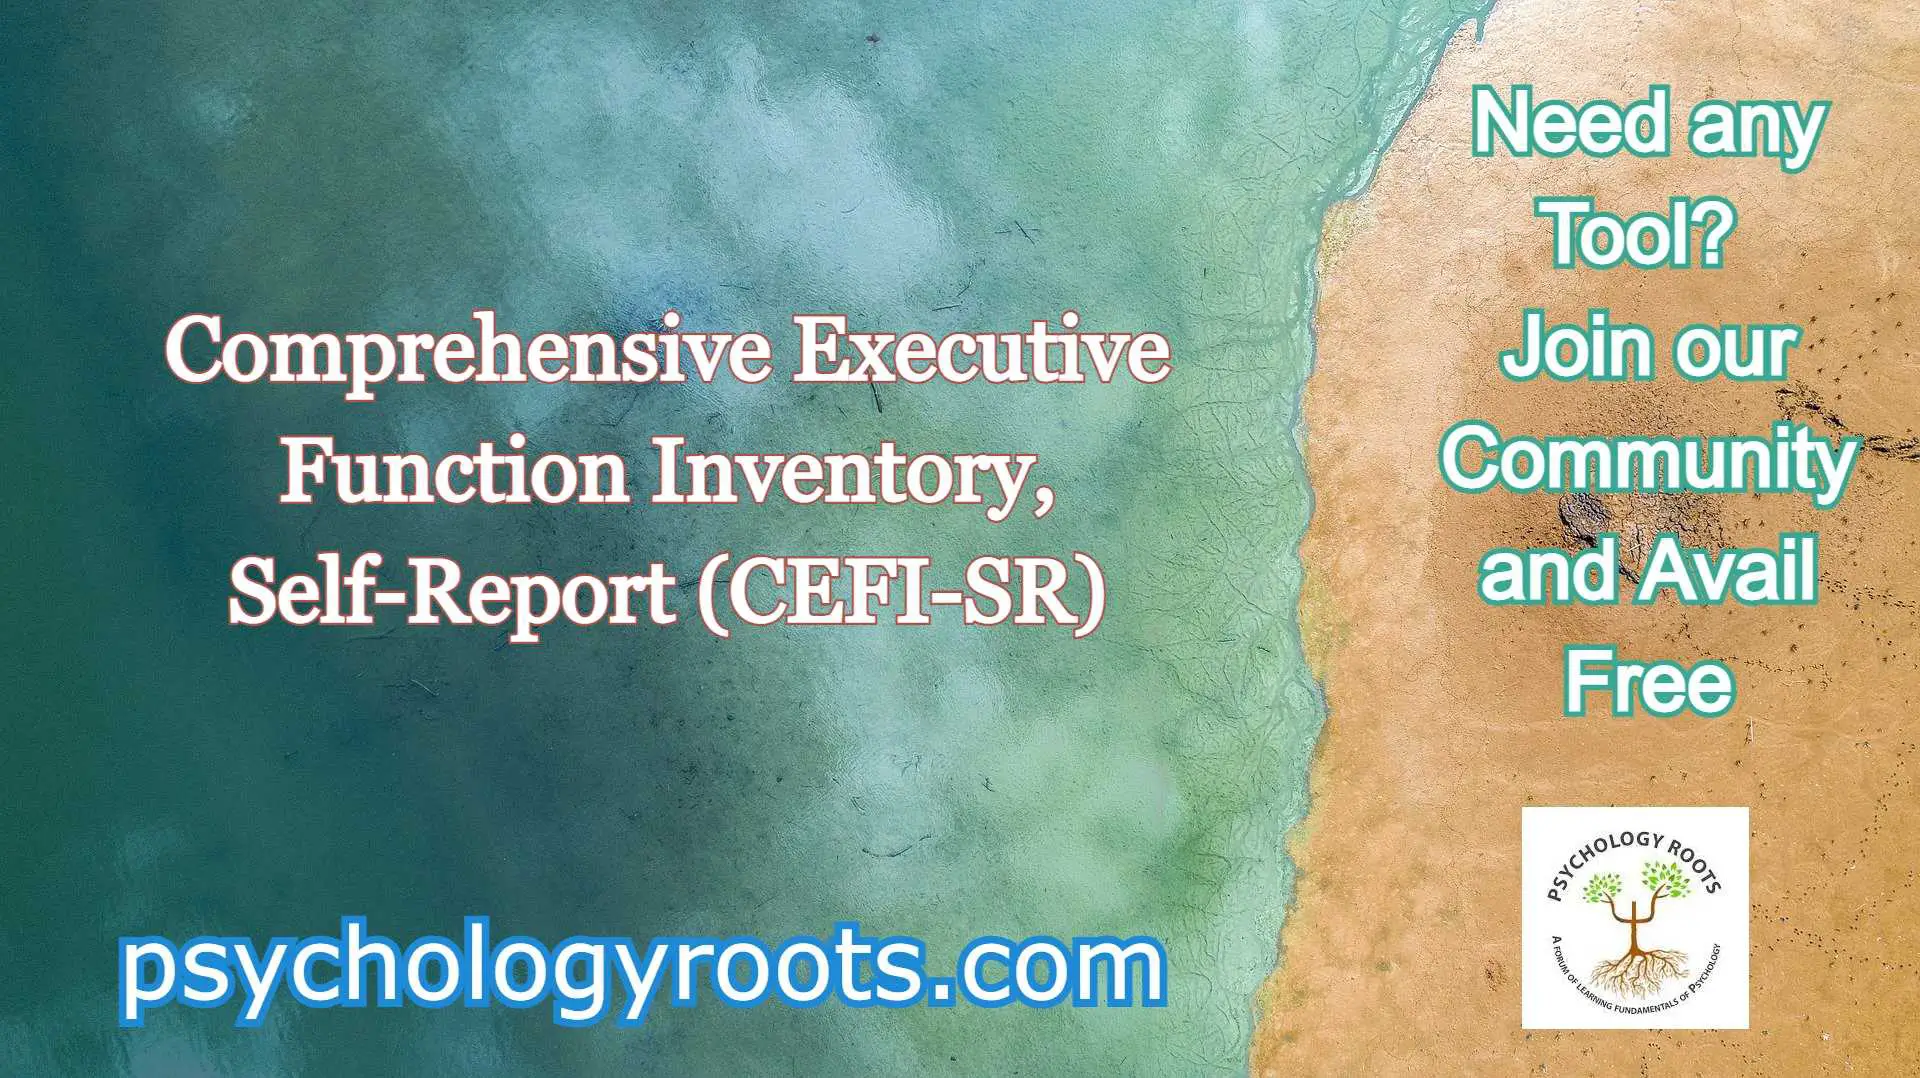 Comprehensive Executive Function Inventory - Self-Report 